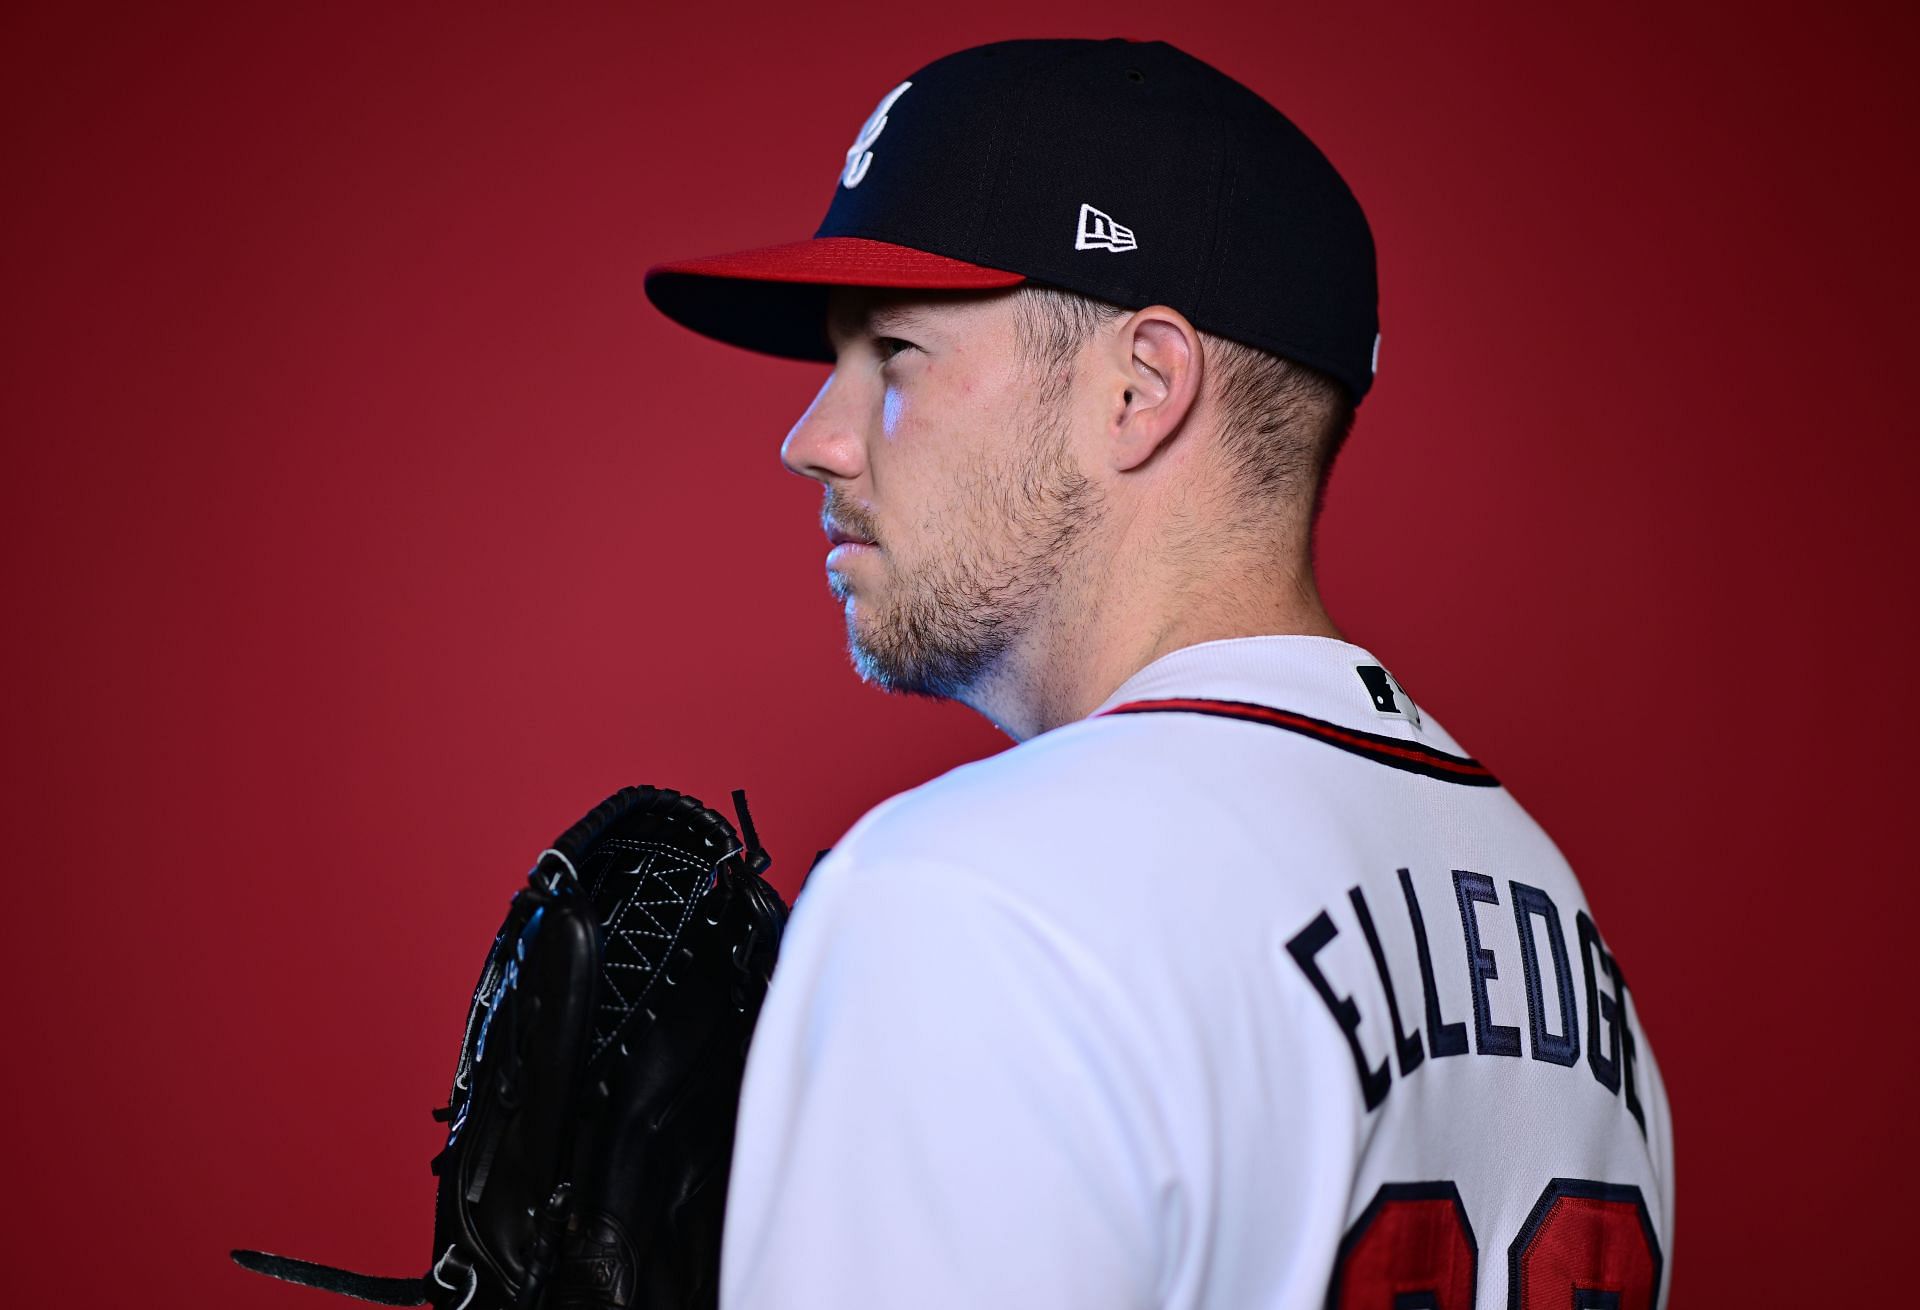 Atlanta on edge: Braves squander chance for hometown party - The Sumter Item